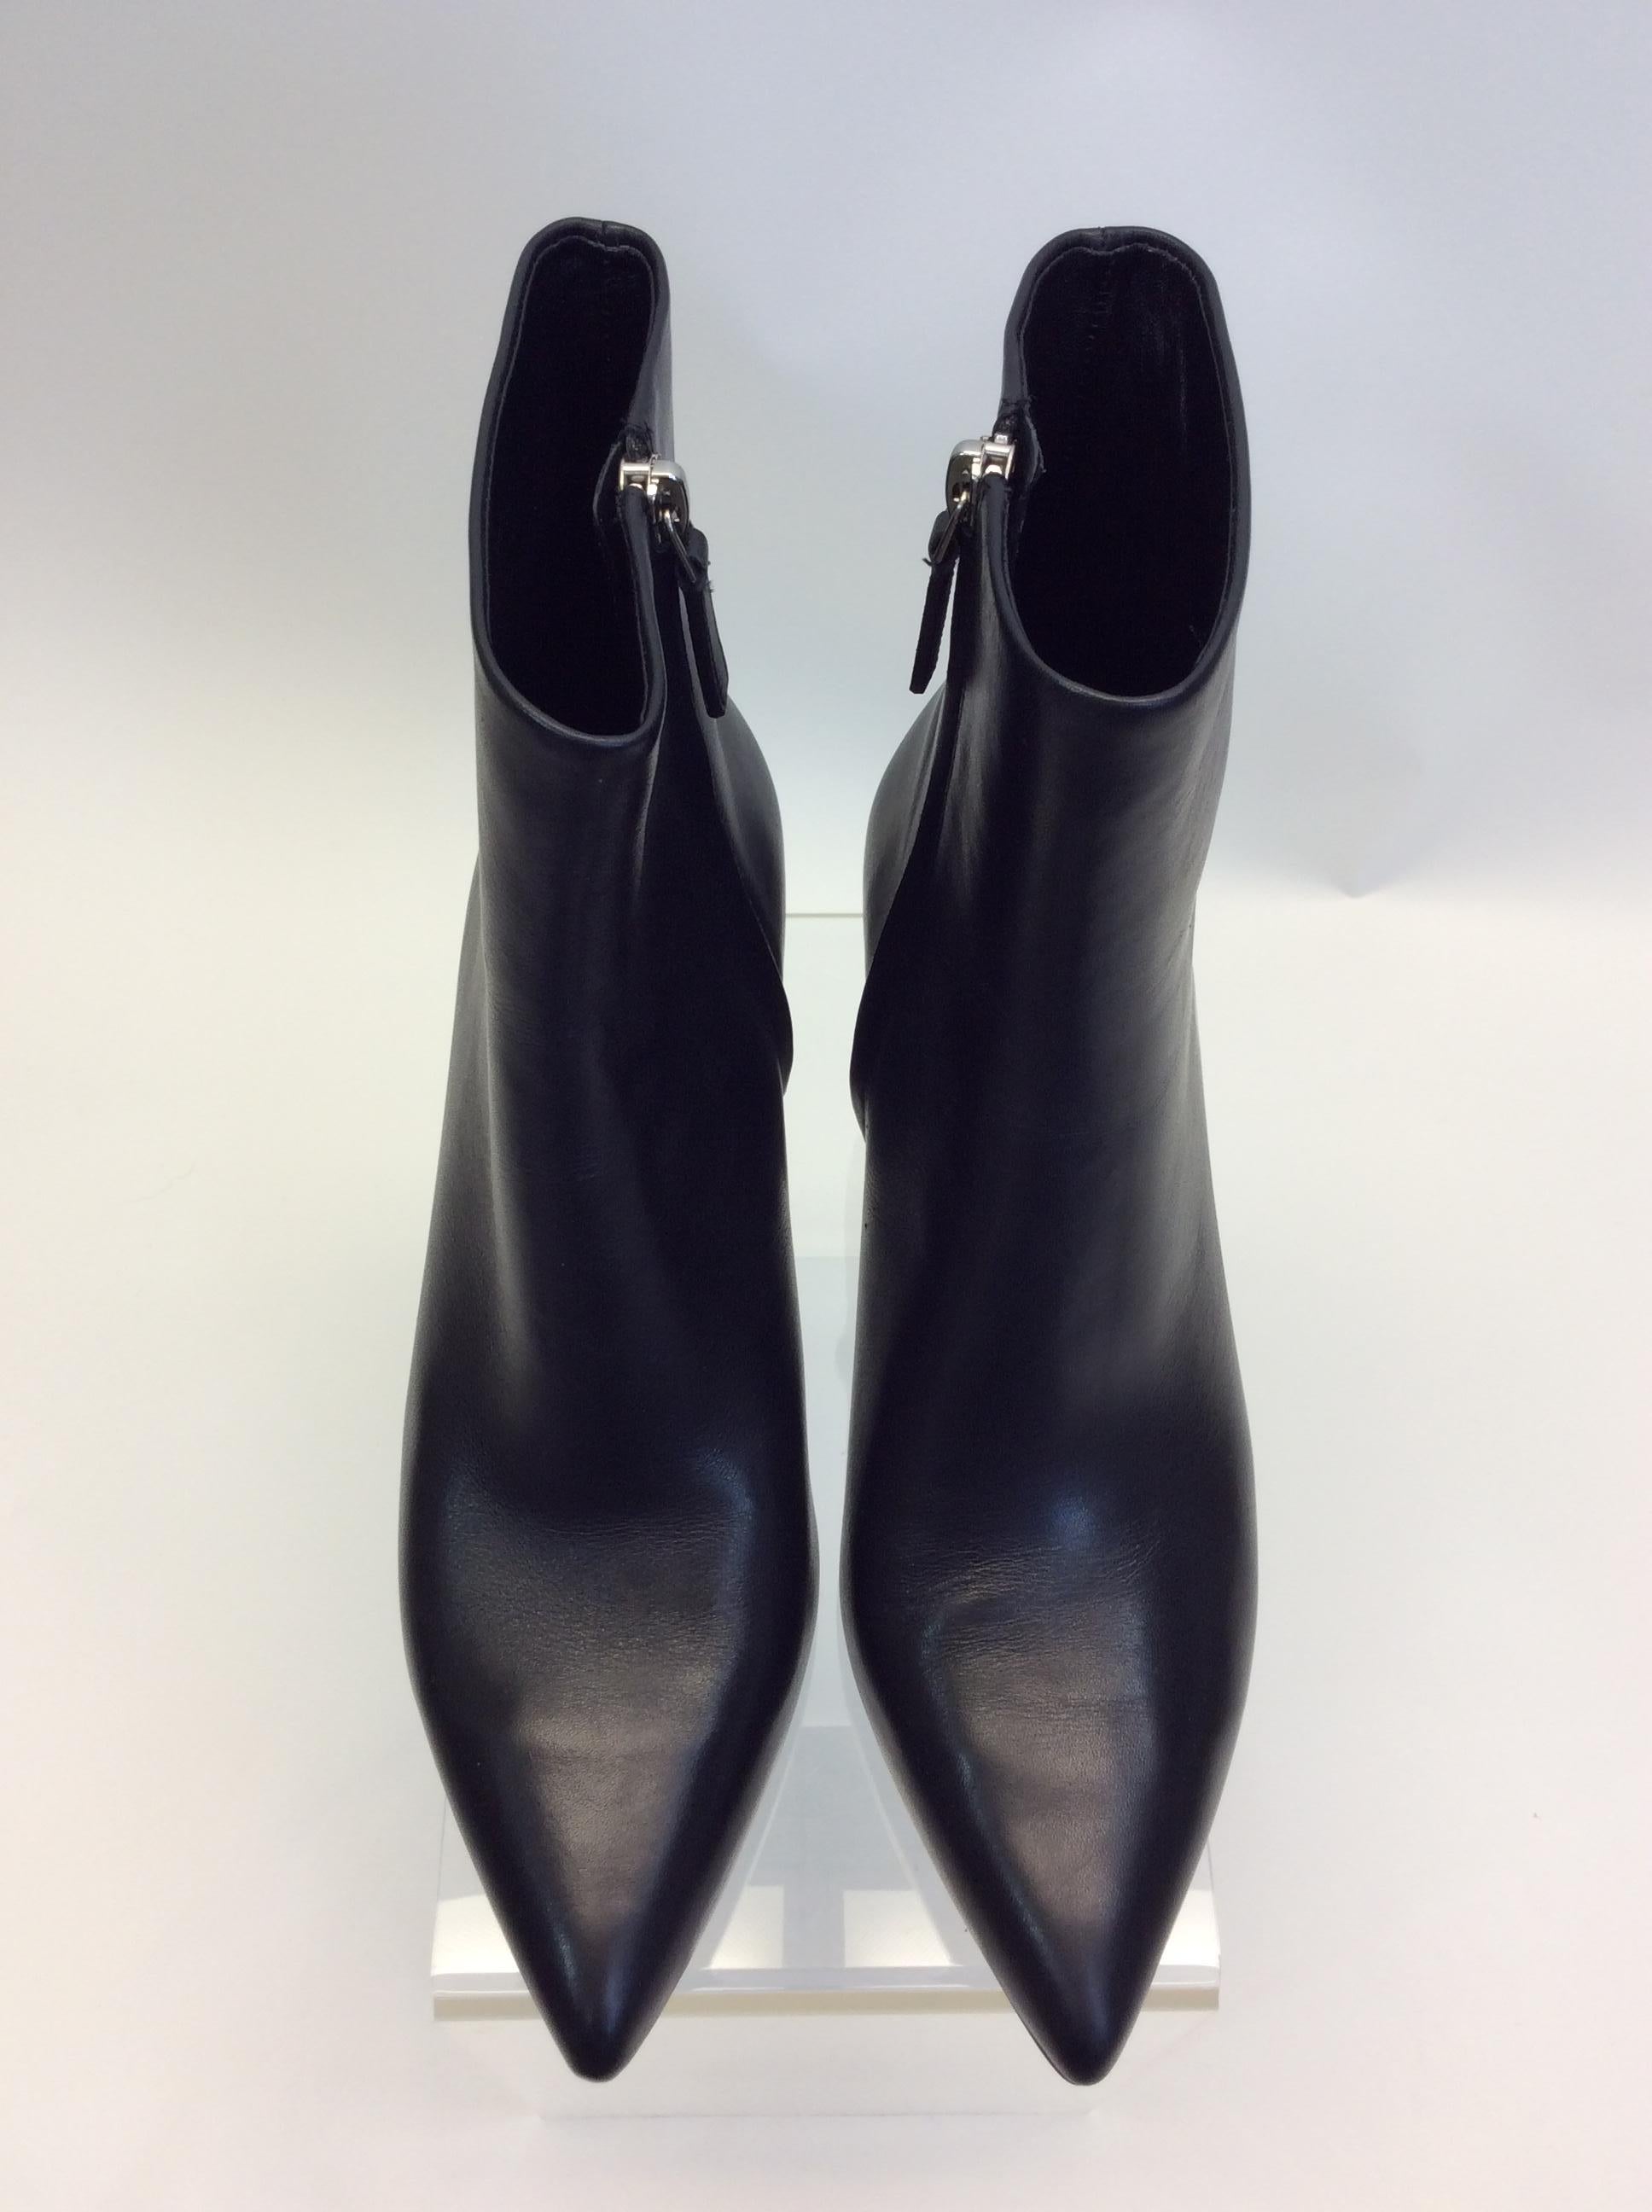 Alexander Wang Black Leather Bootie NIB For Sale 2